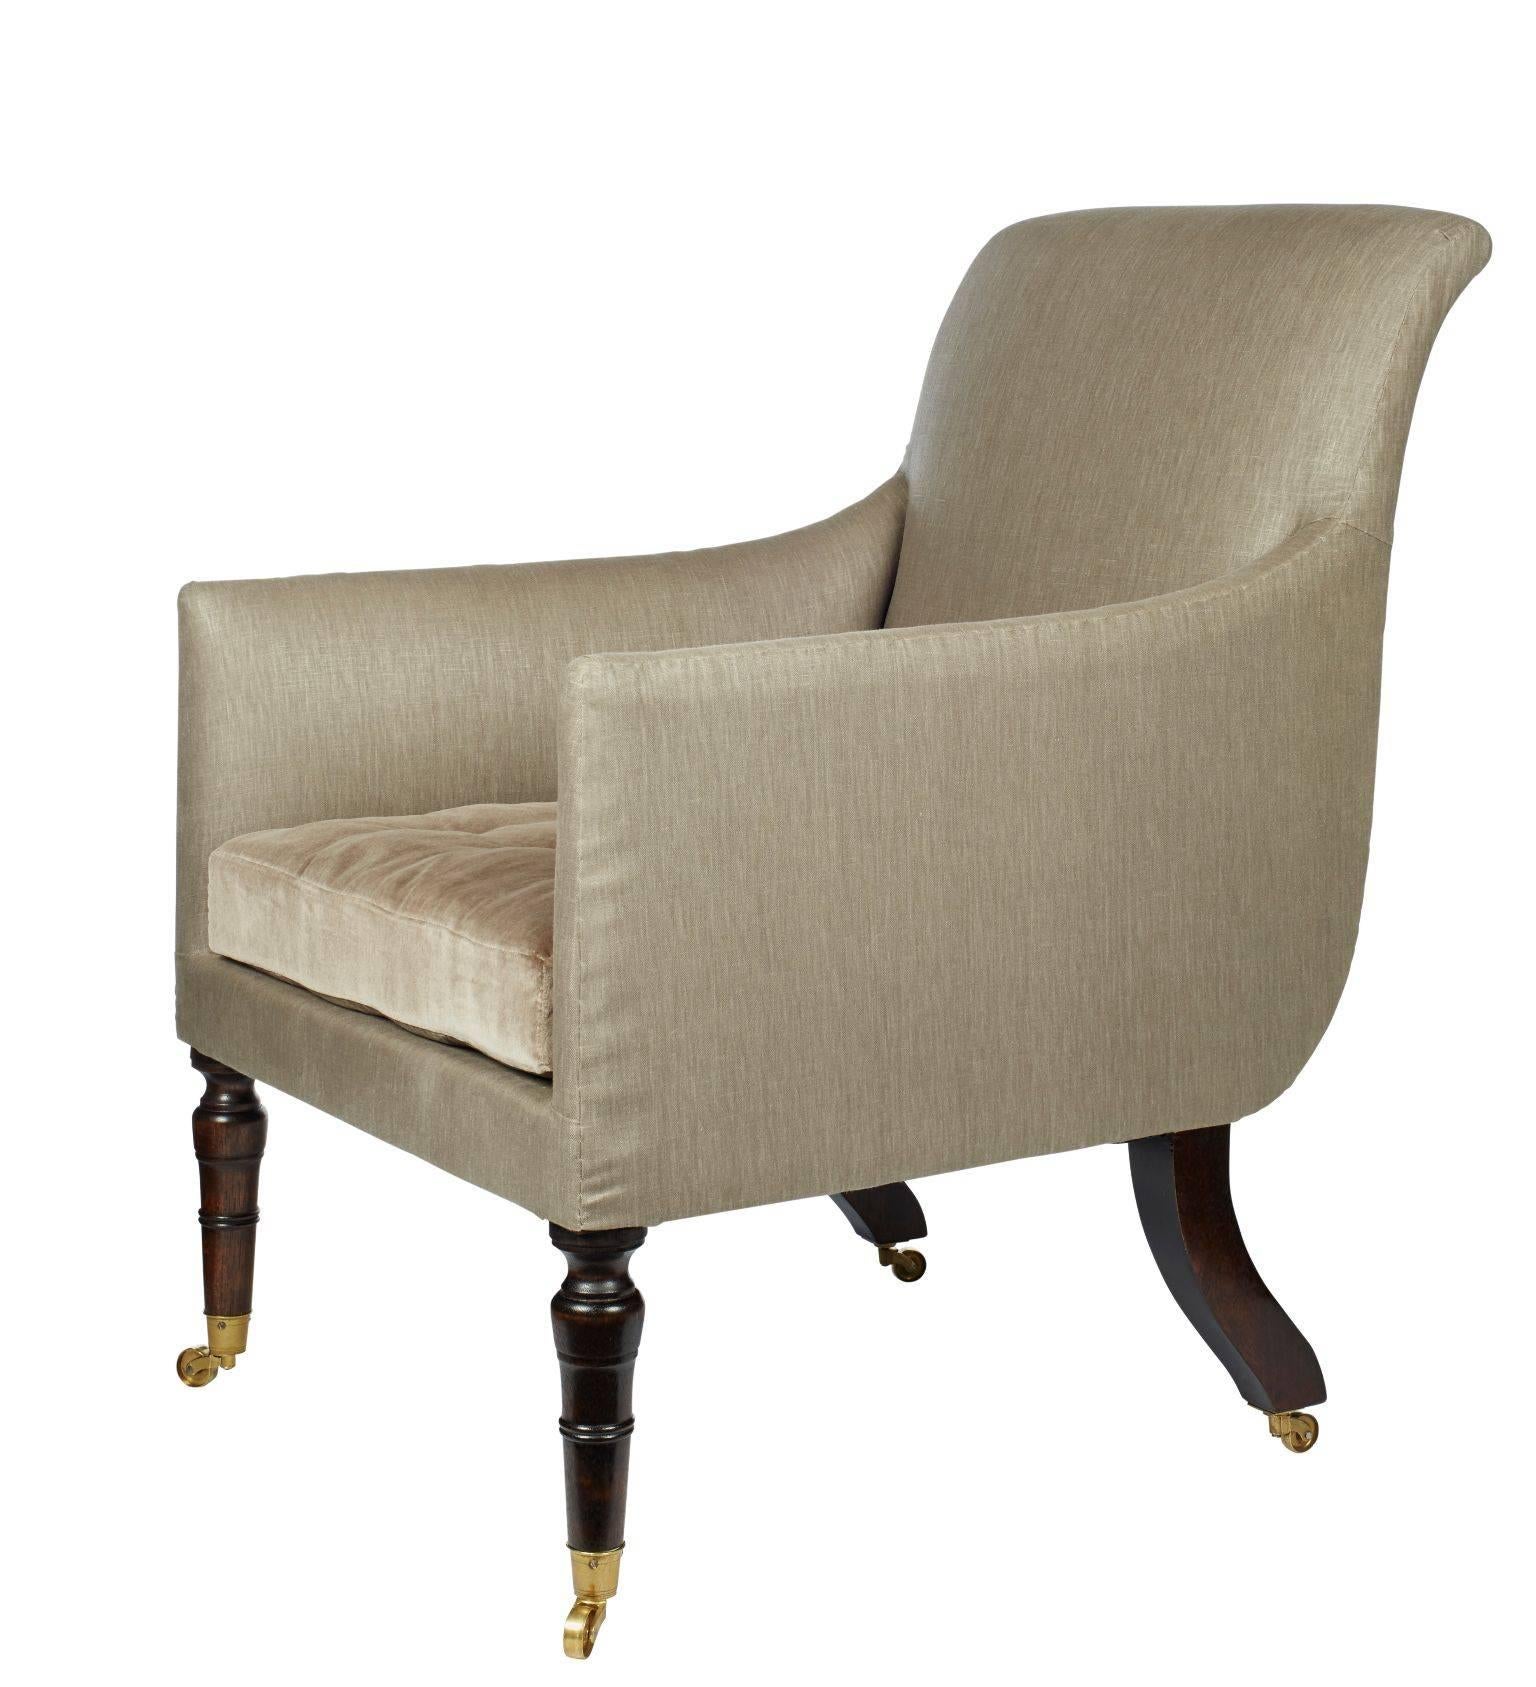 The Hope Library chair was inspired by an original Regency sabre-legged library chair. The armchair is customizable in fabric, detailing and legs. Featured image shows glazed linen and velvet, horsehair swab cushion with silk tufts and mahogany legs